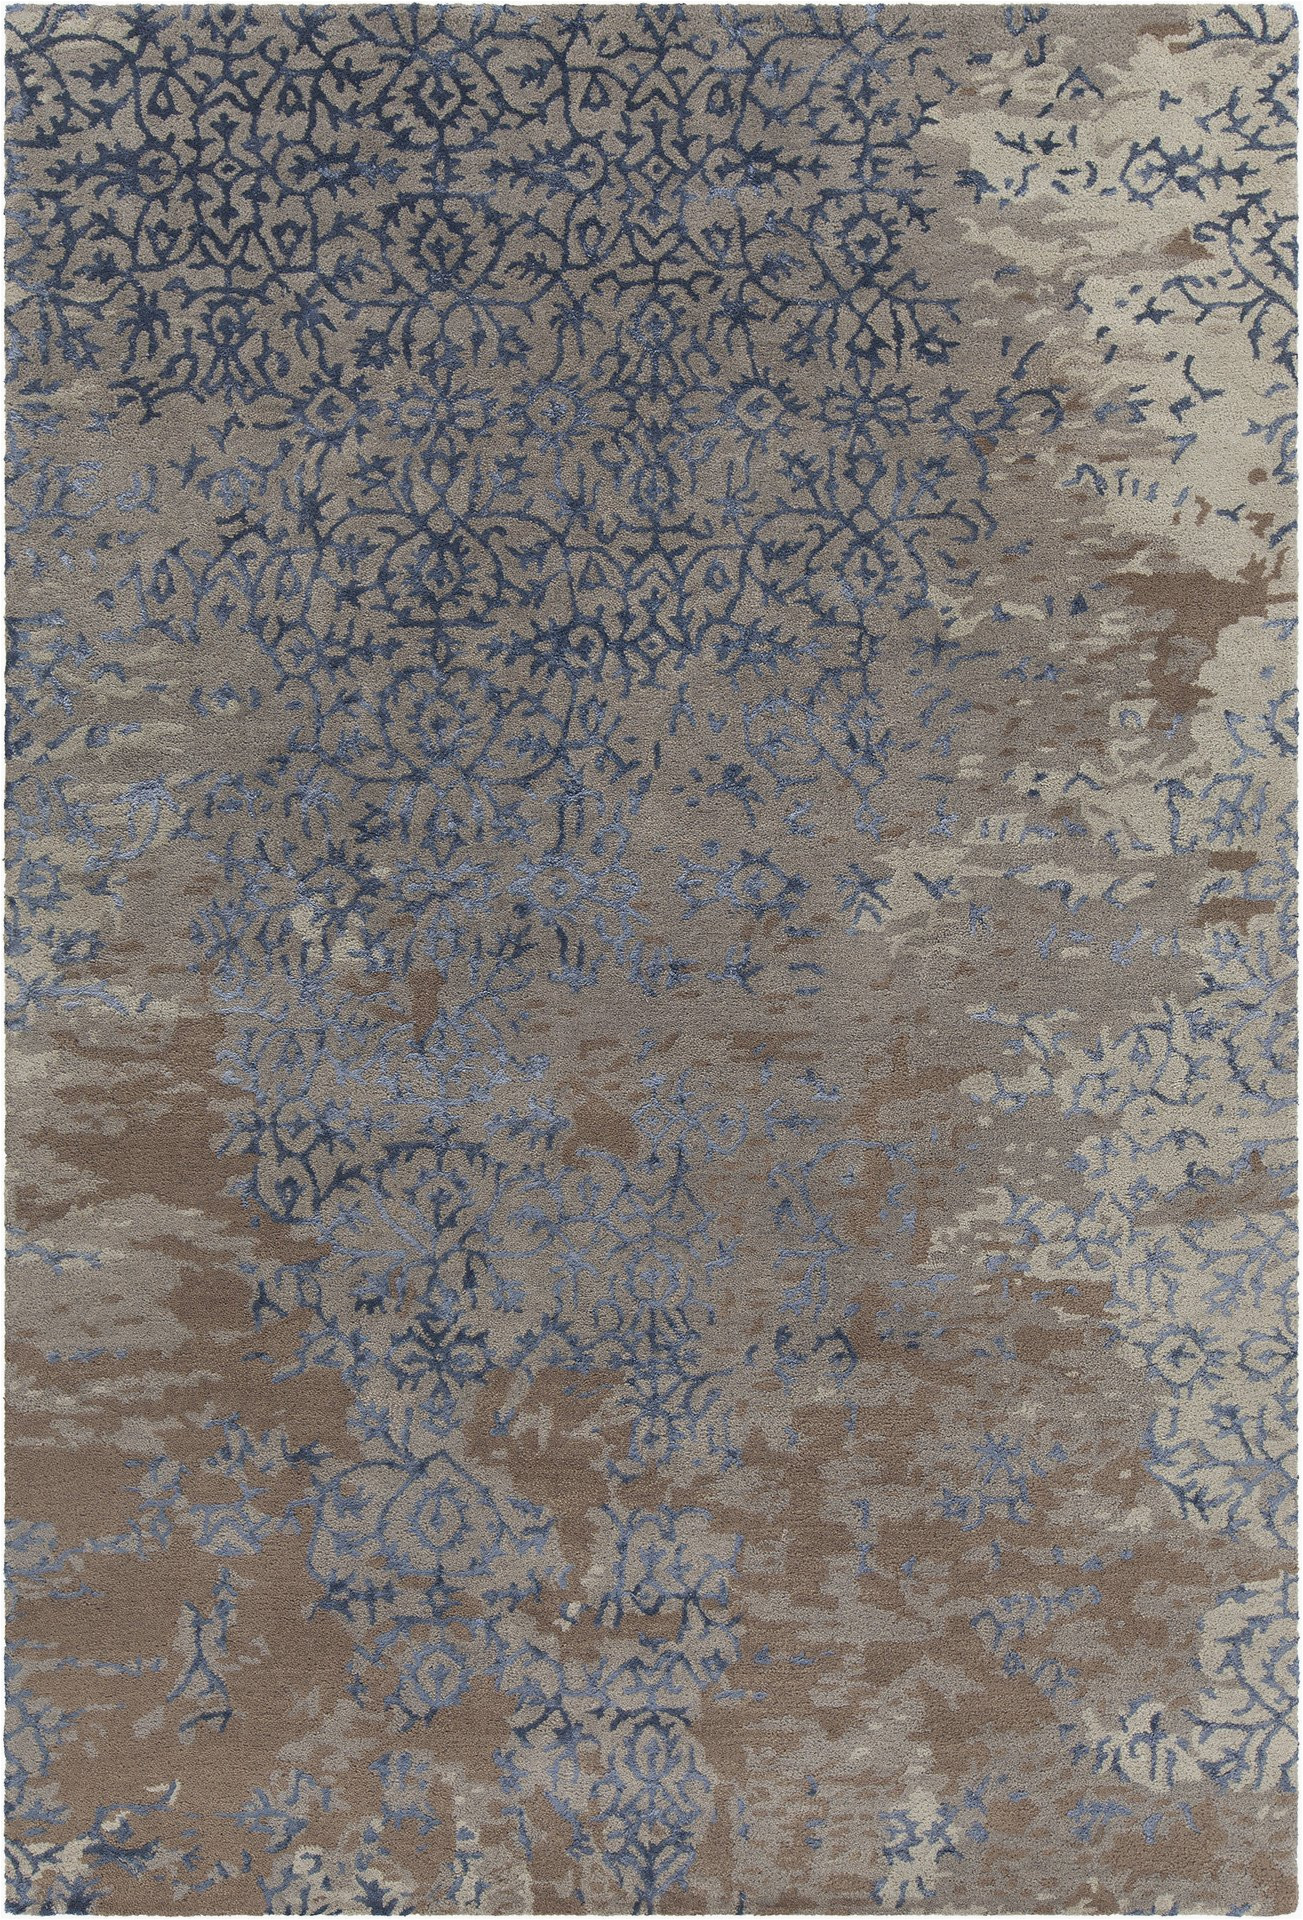 Blue and Gray Throw Rugs Rupec Collection Hand Tufted area Rug In Grey Blue Brown